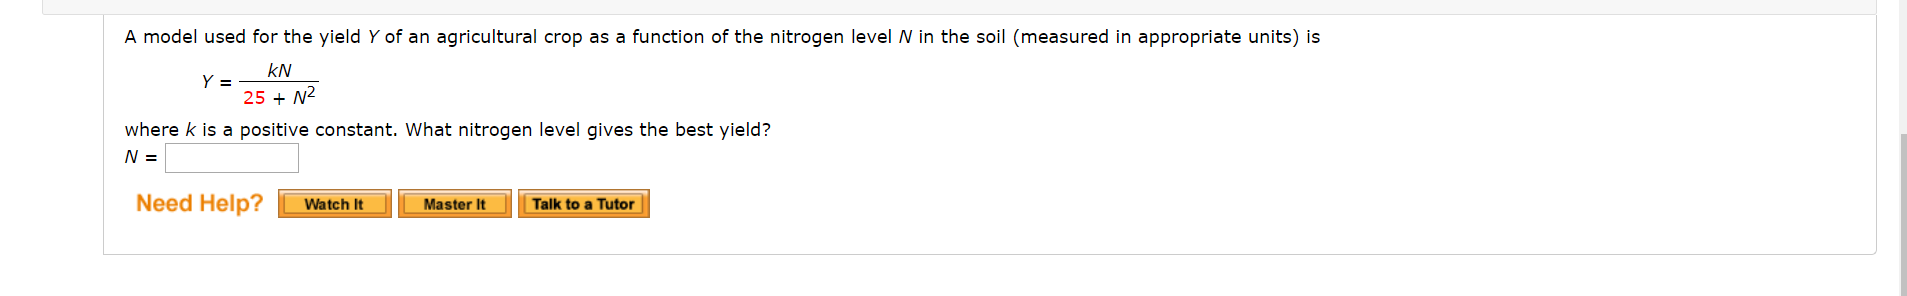 A model used for the yield Y of an agricultural crop as a function of the nitrogen levelN in the soil (measured in appropriate units) is
kN
25 + N2
where k is a positive constant. What nitrogen level gives the best yield?
N =
Need Help?
Watch It
Master It
Talk to a Tutor
